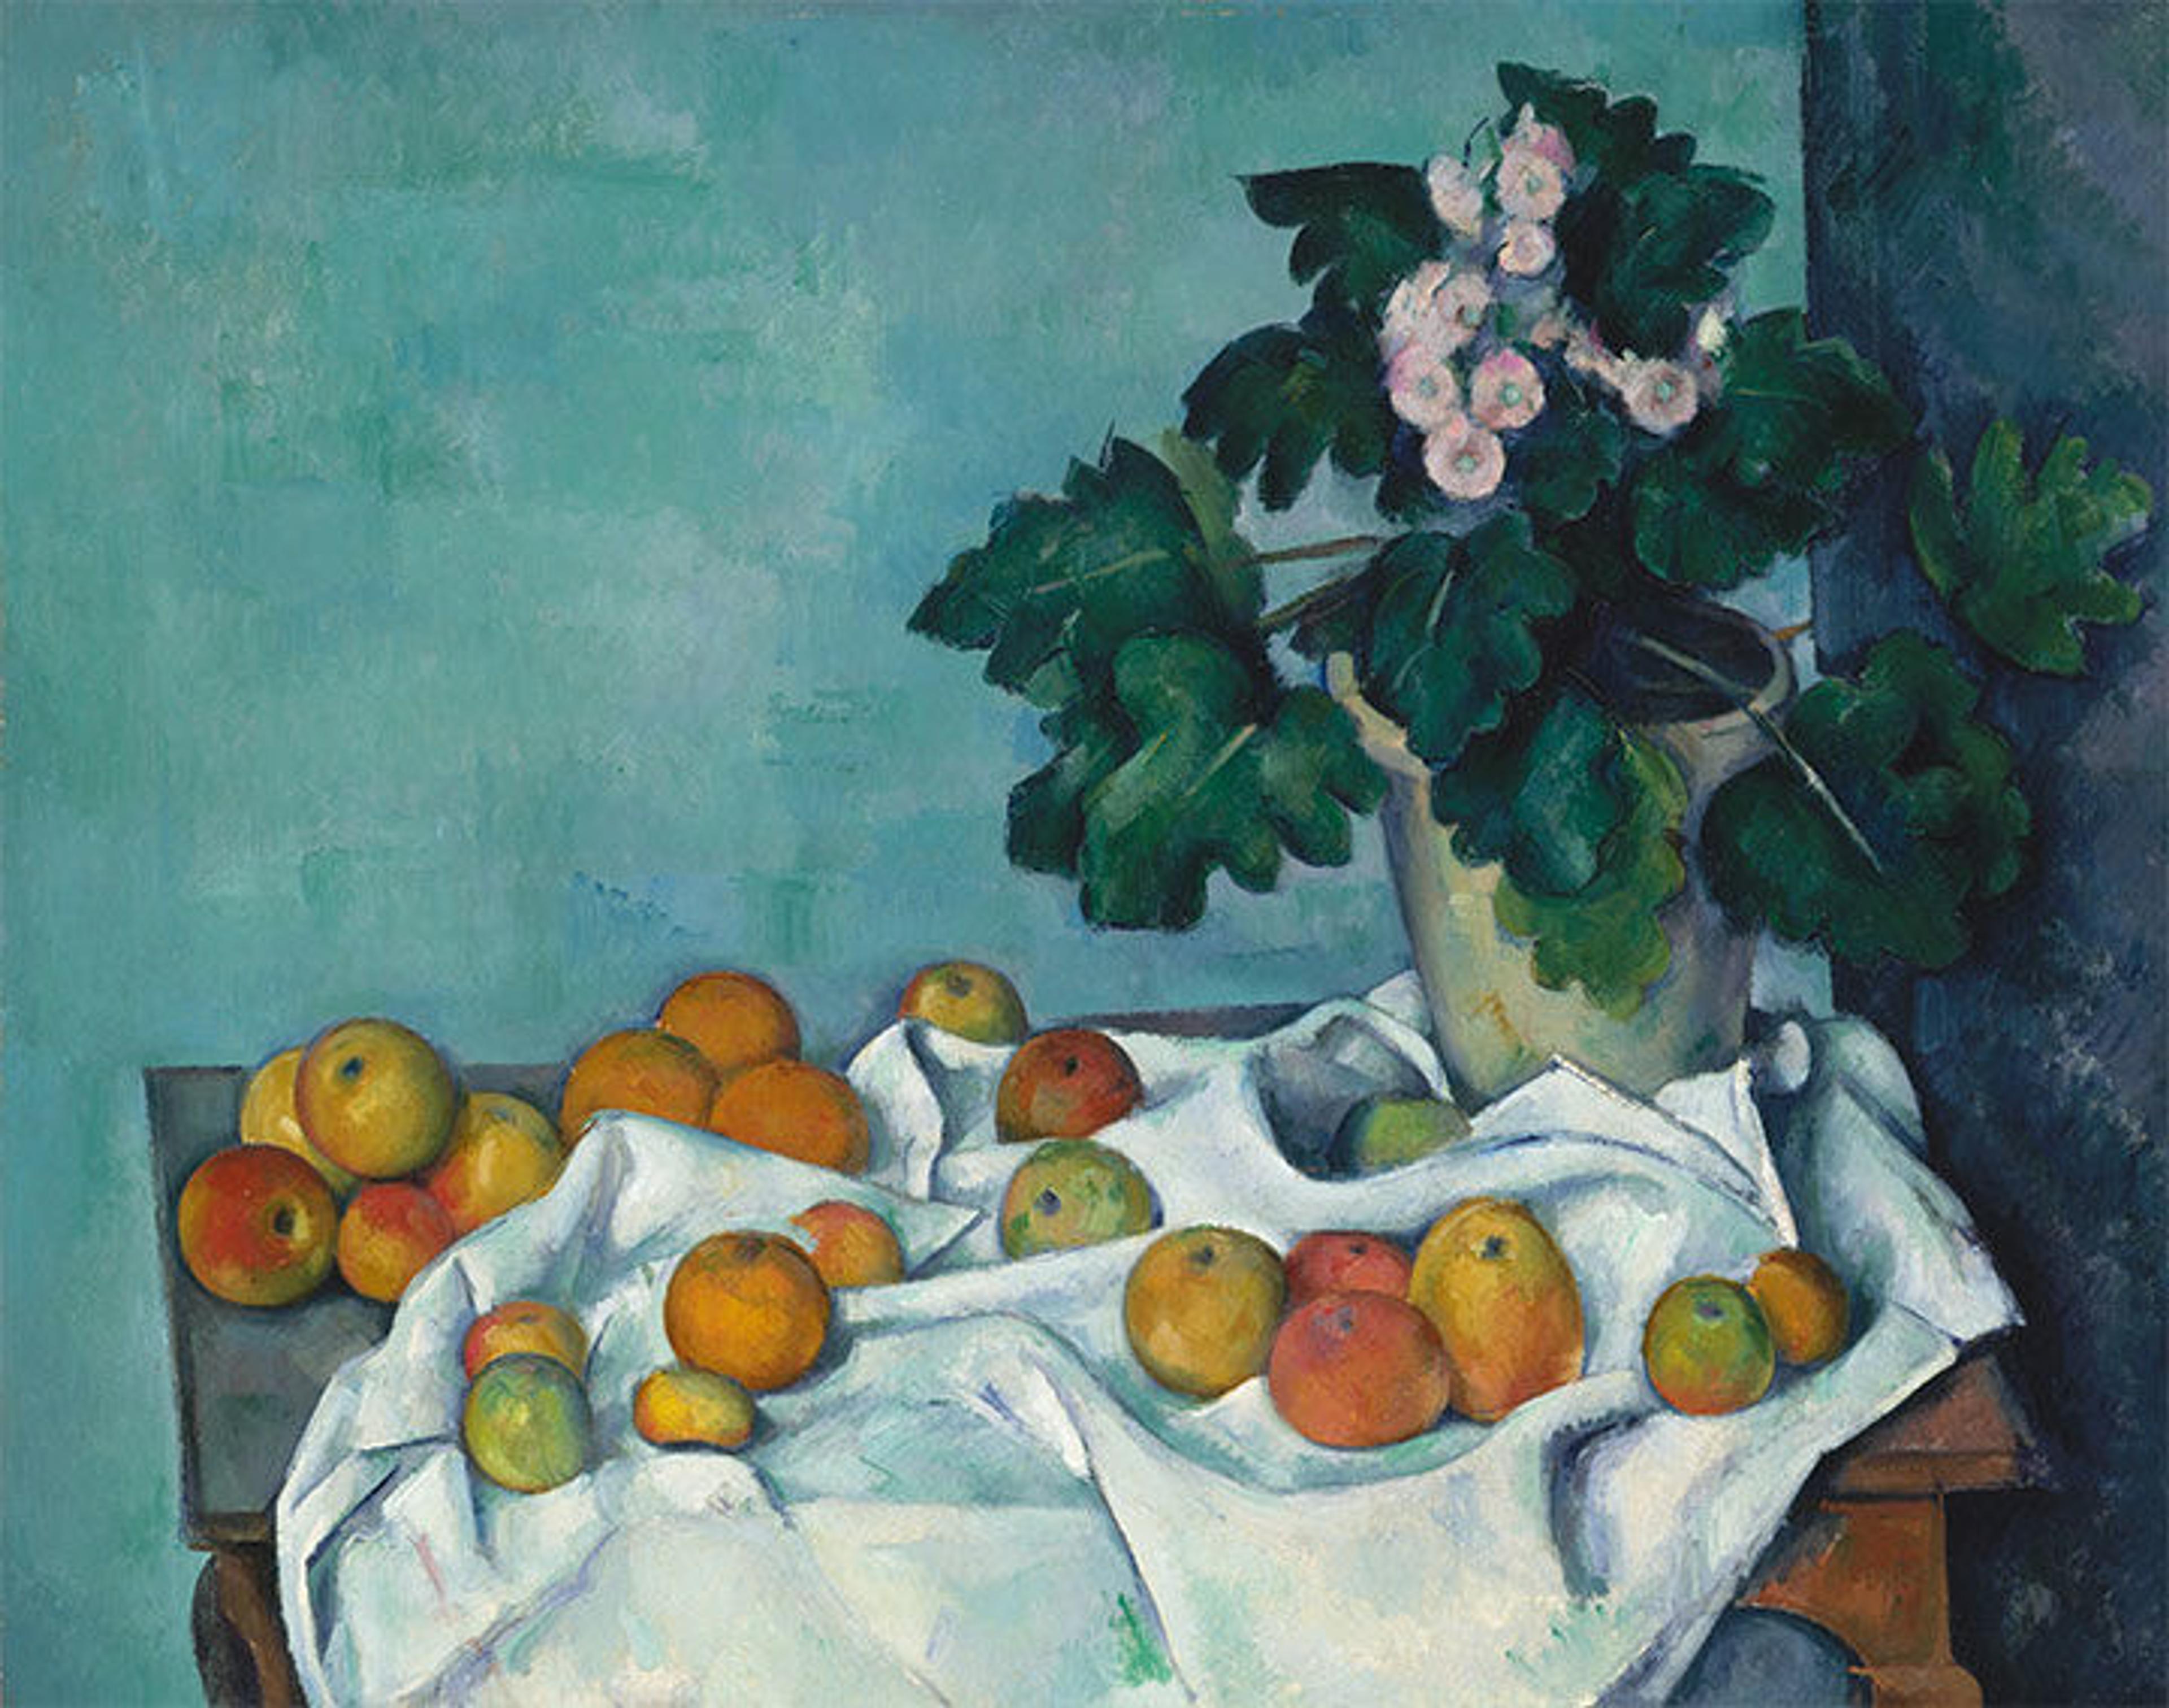 Cezanne's painting of many apples and a potted flower on a table.